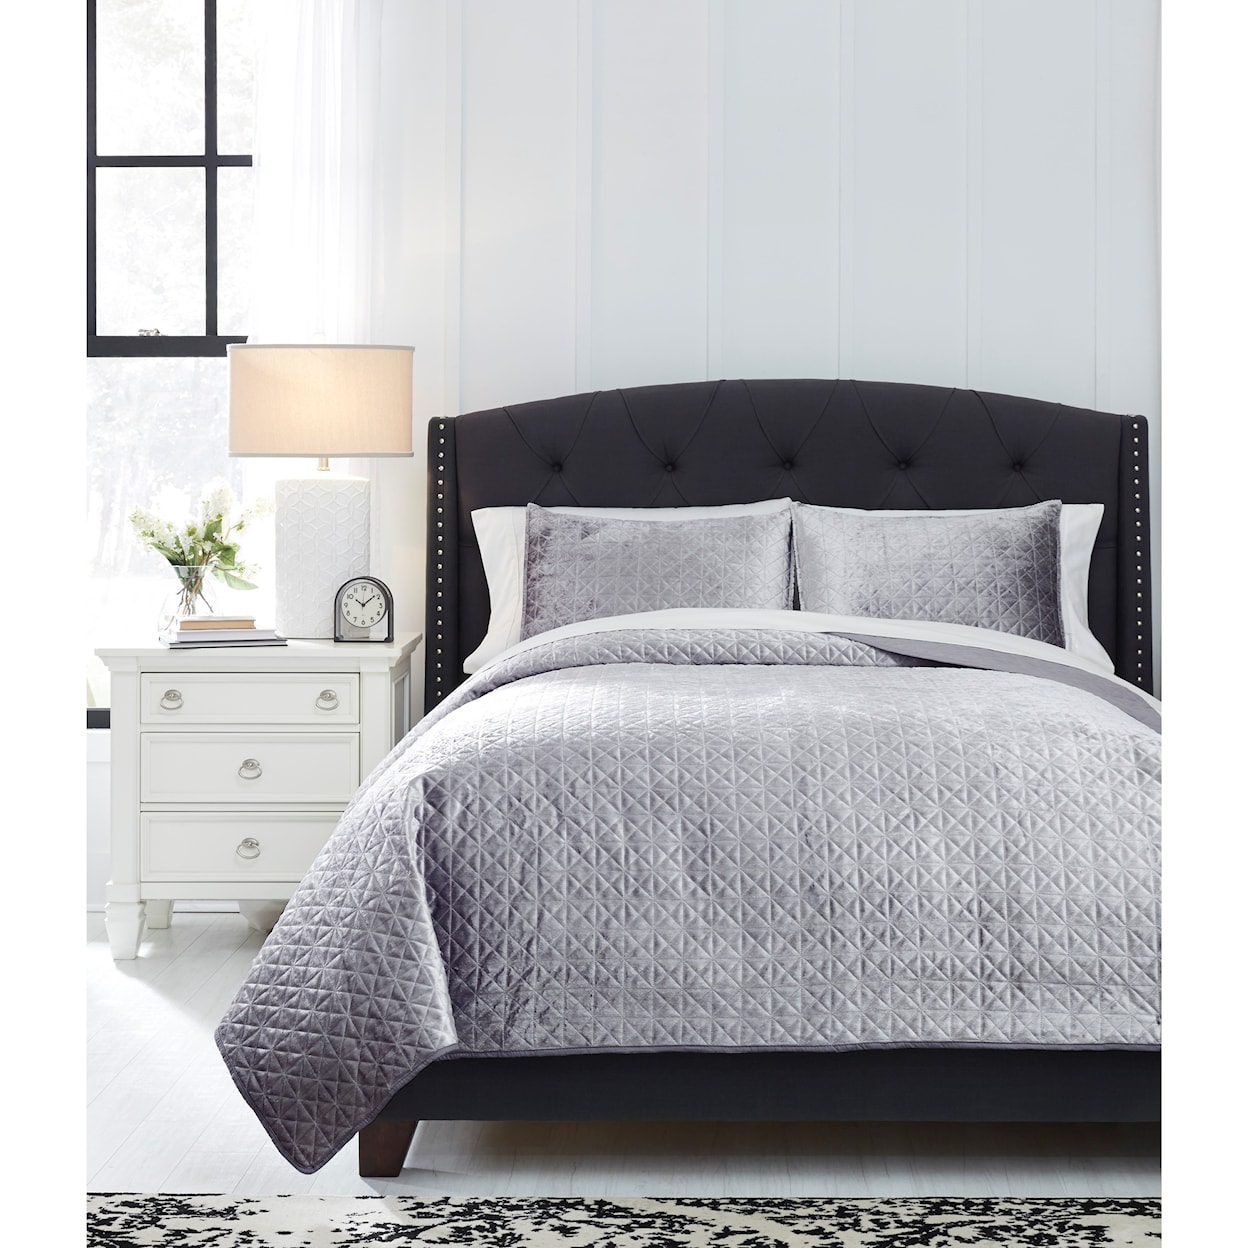 Signature Design by Ashley Bedding Sets Queen Maryam Gray Coverlet Set